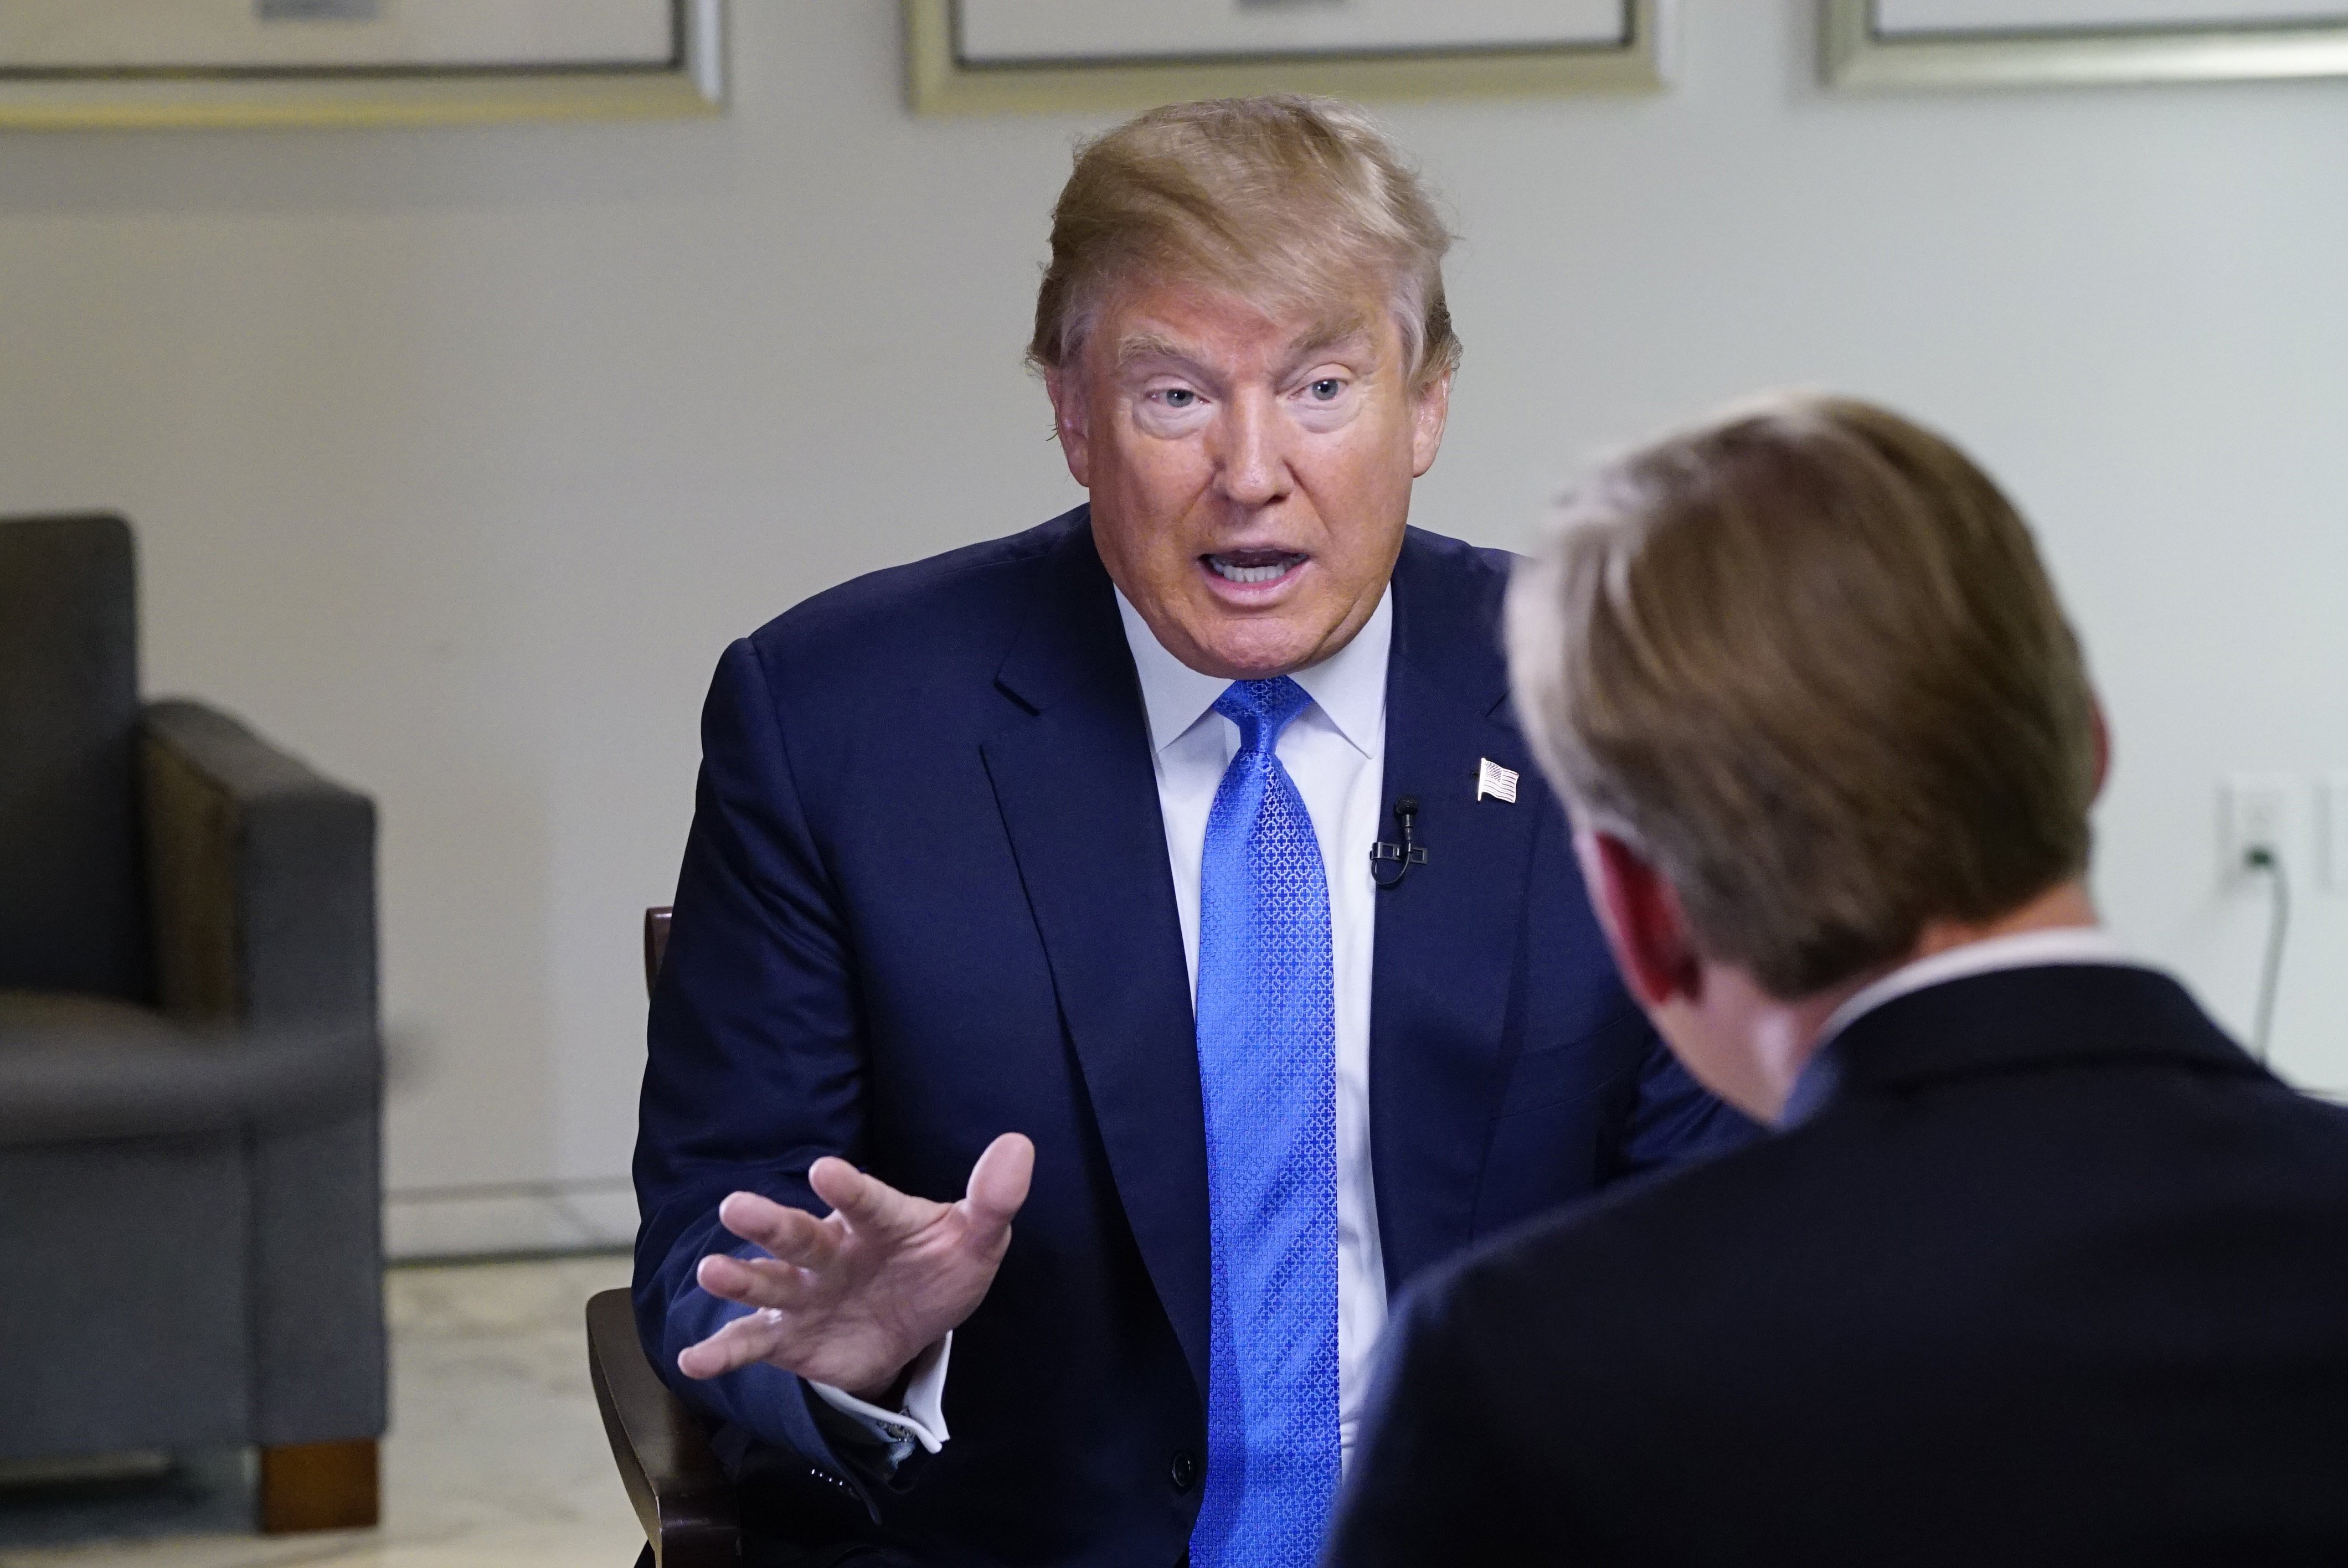 In this Friday, Oct. 9, 2015, photo, provided by CBS, Republican presidential candidate Donald Trump speaks during an interview with John Dickerson at Trump Tower in New York, for the Sunday, Oct. 11, edition, of "Face The Nation." (John P. Filo/CBS via AP)